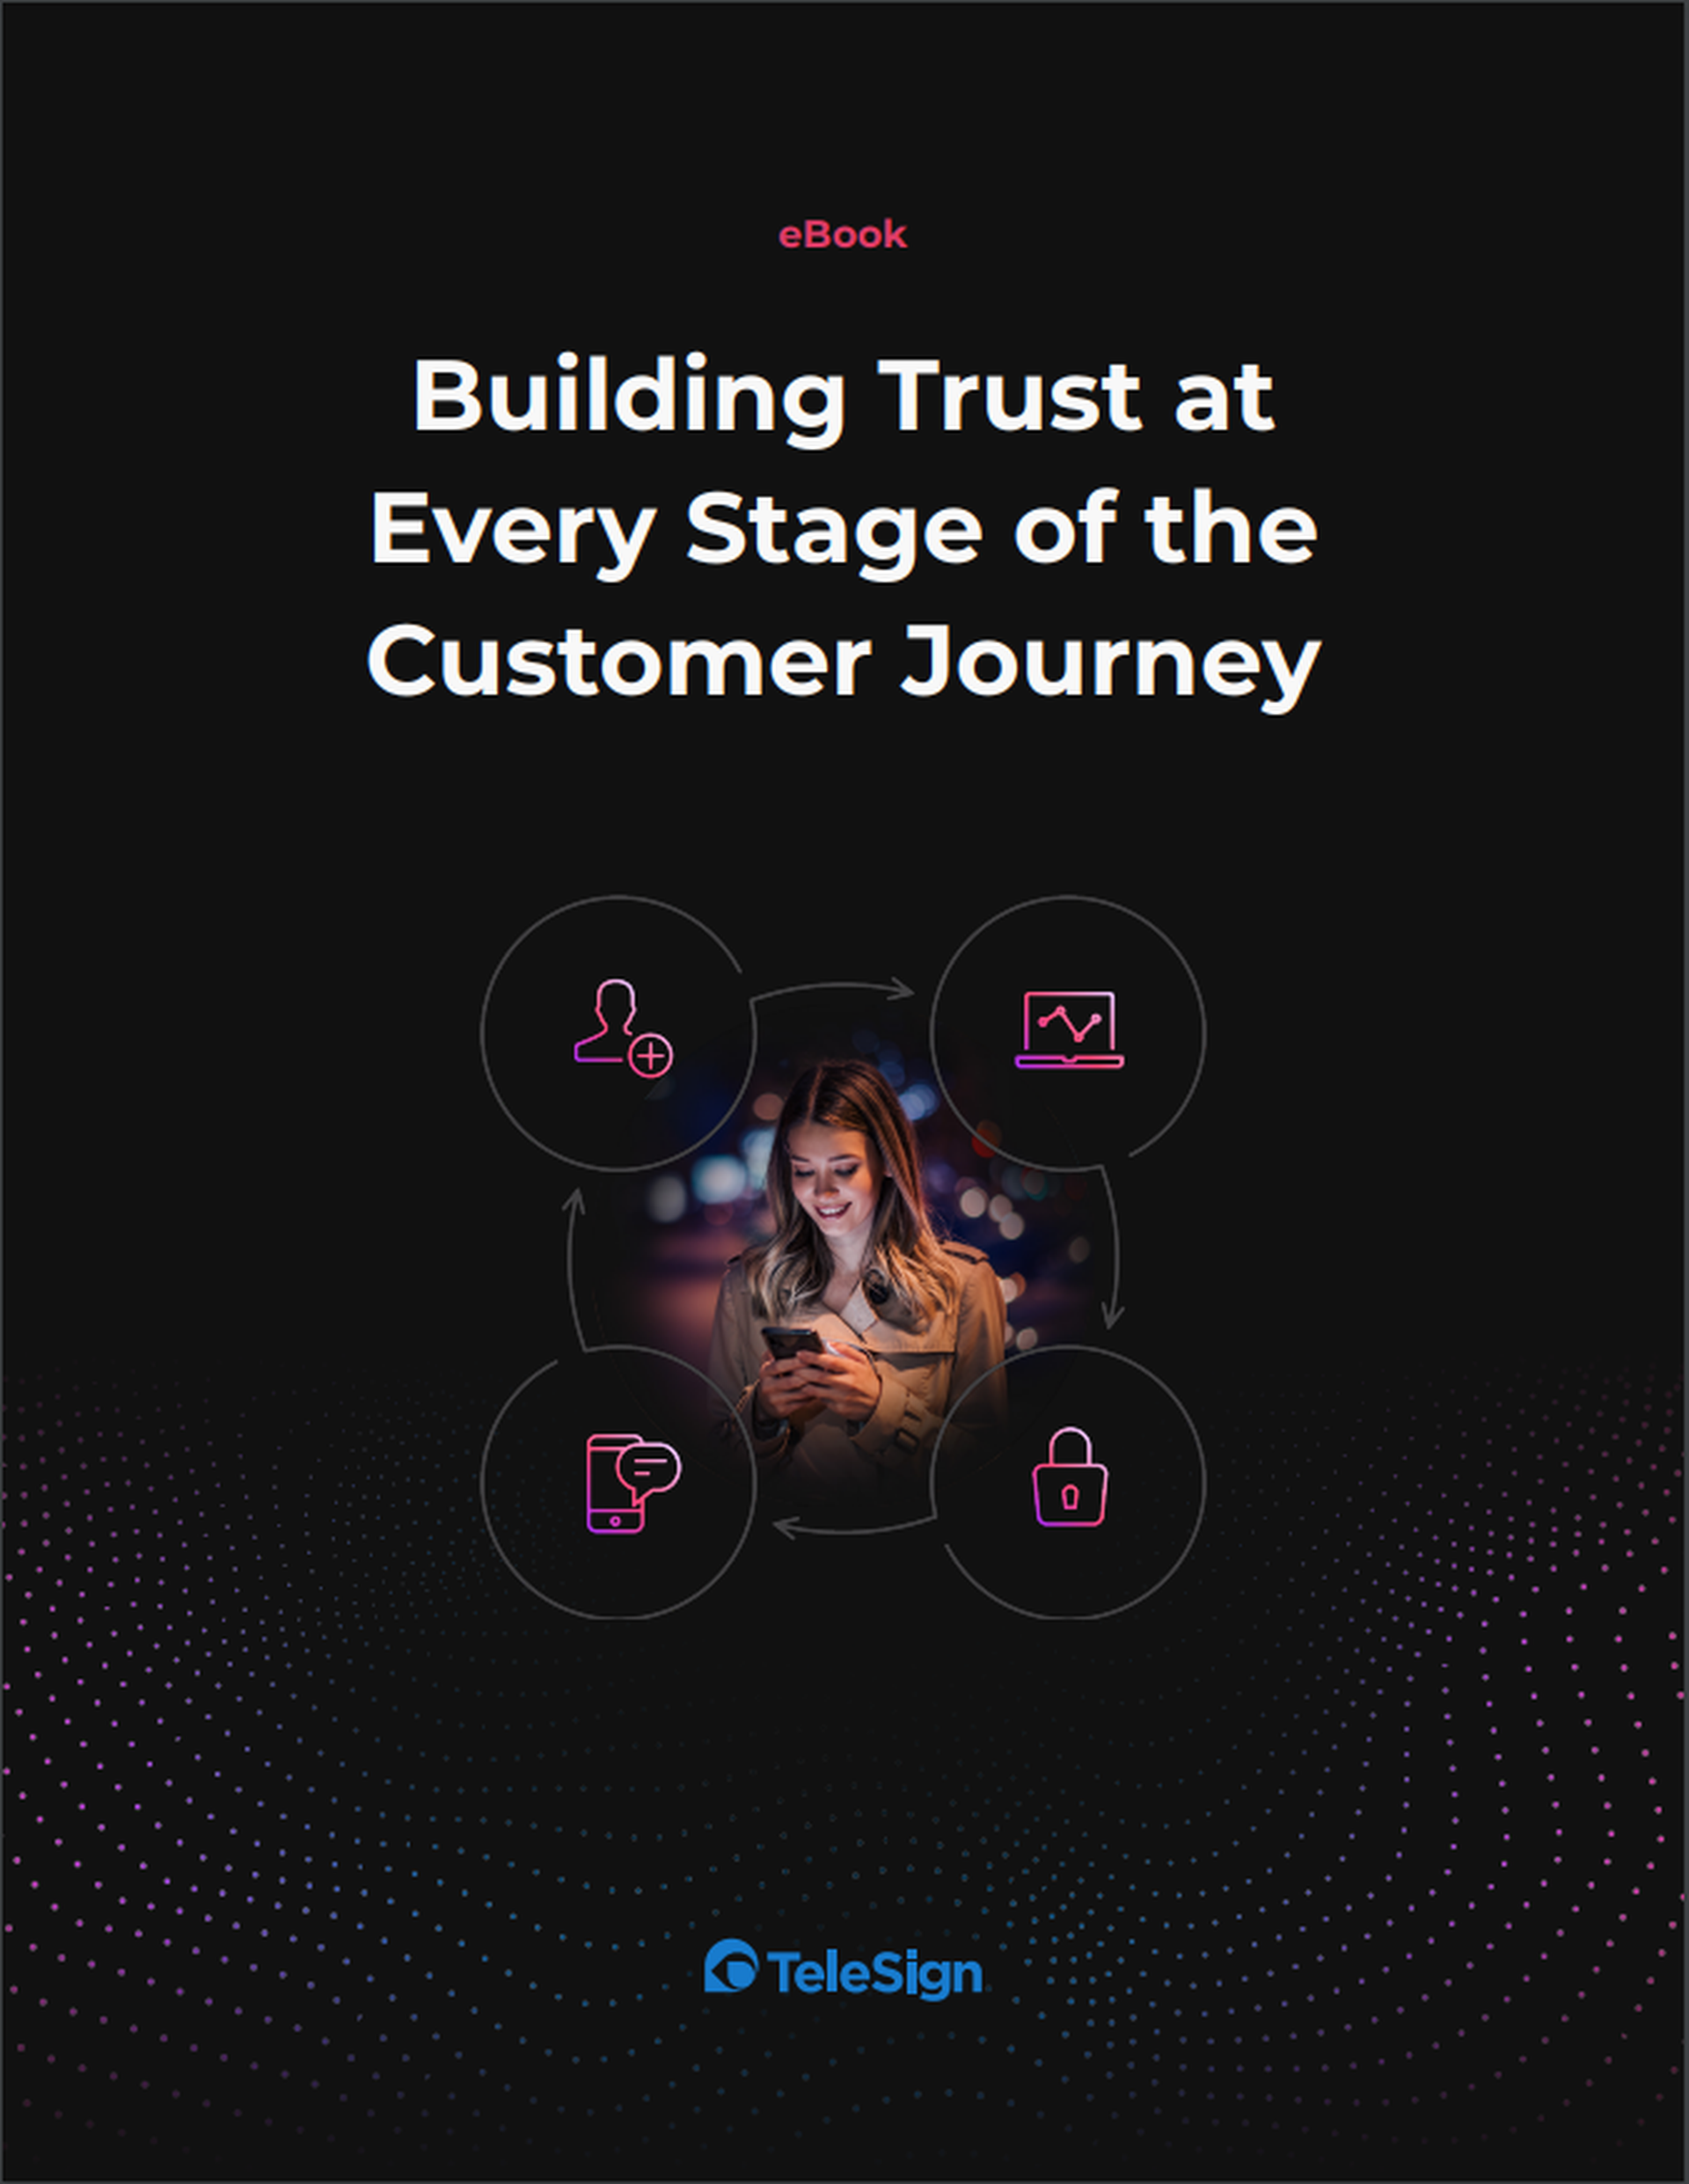 Building Trust at Every Stage of the Customer Journey